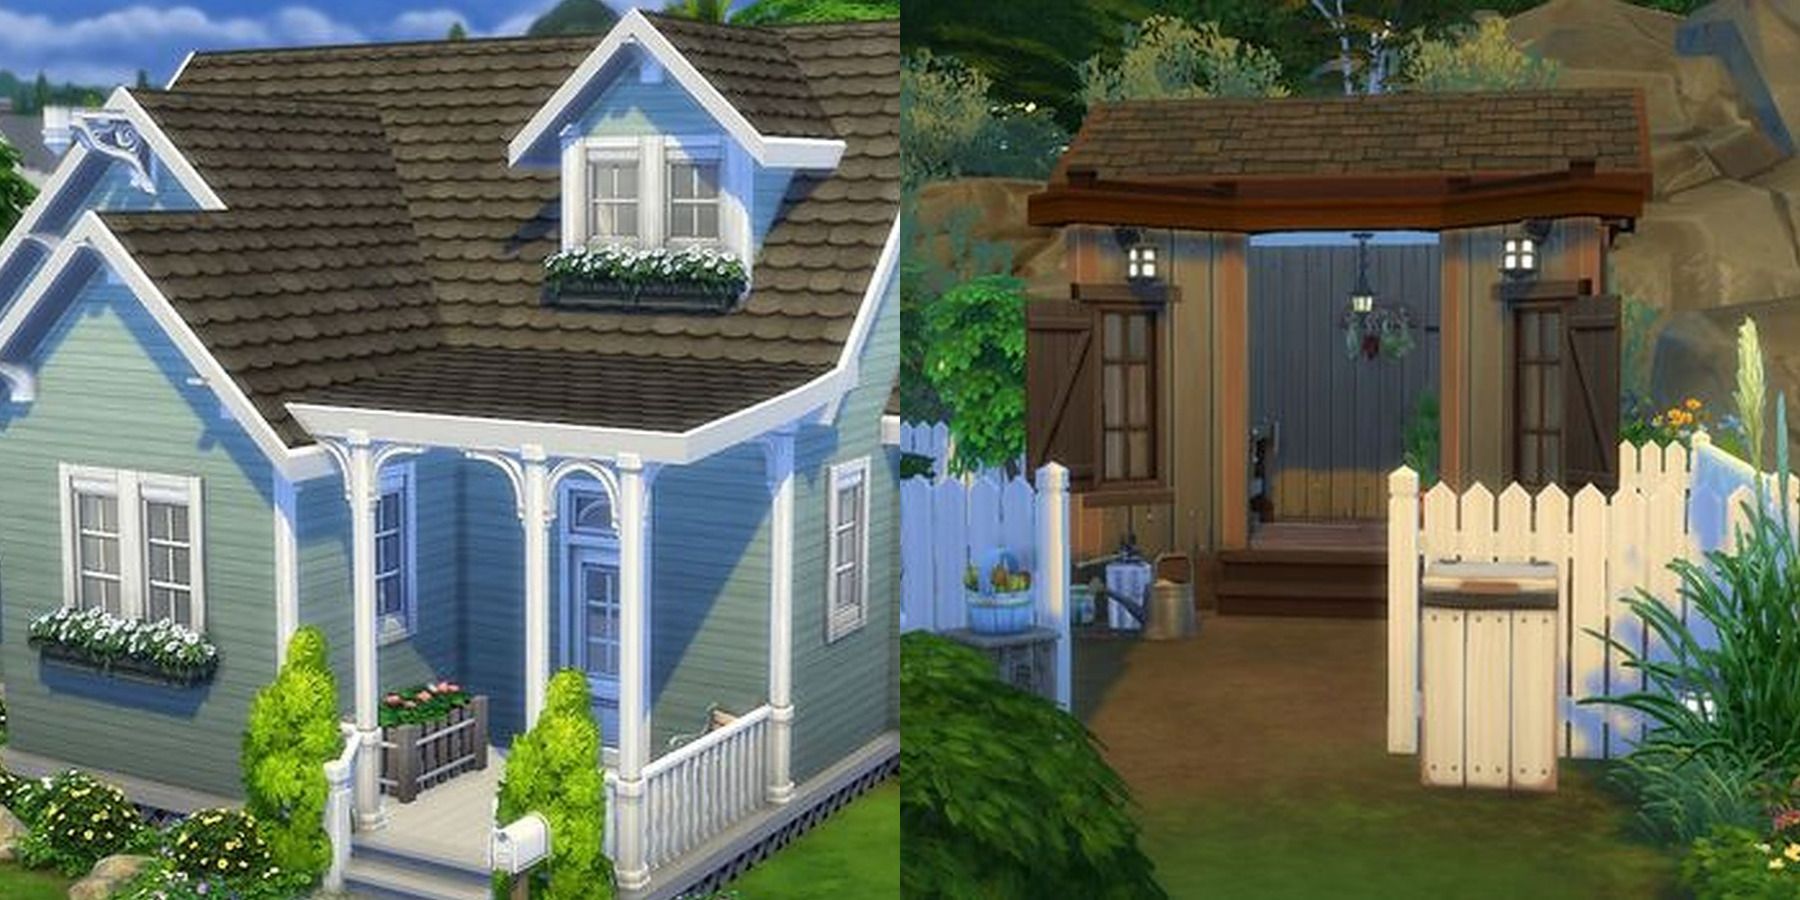 the sims 4 building houses feature split image house with a porch and a garden shed